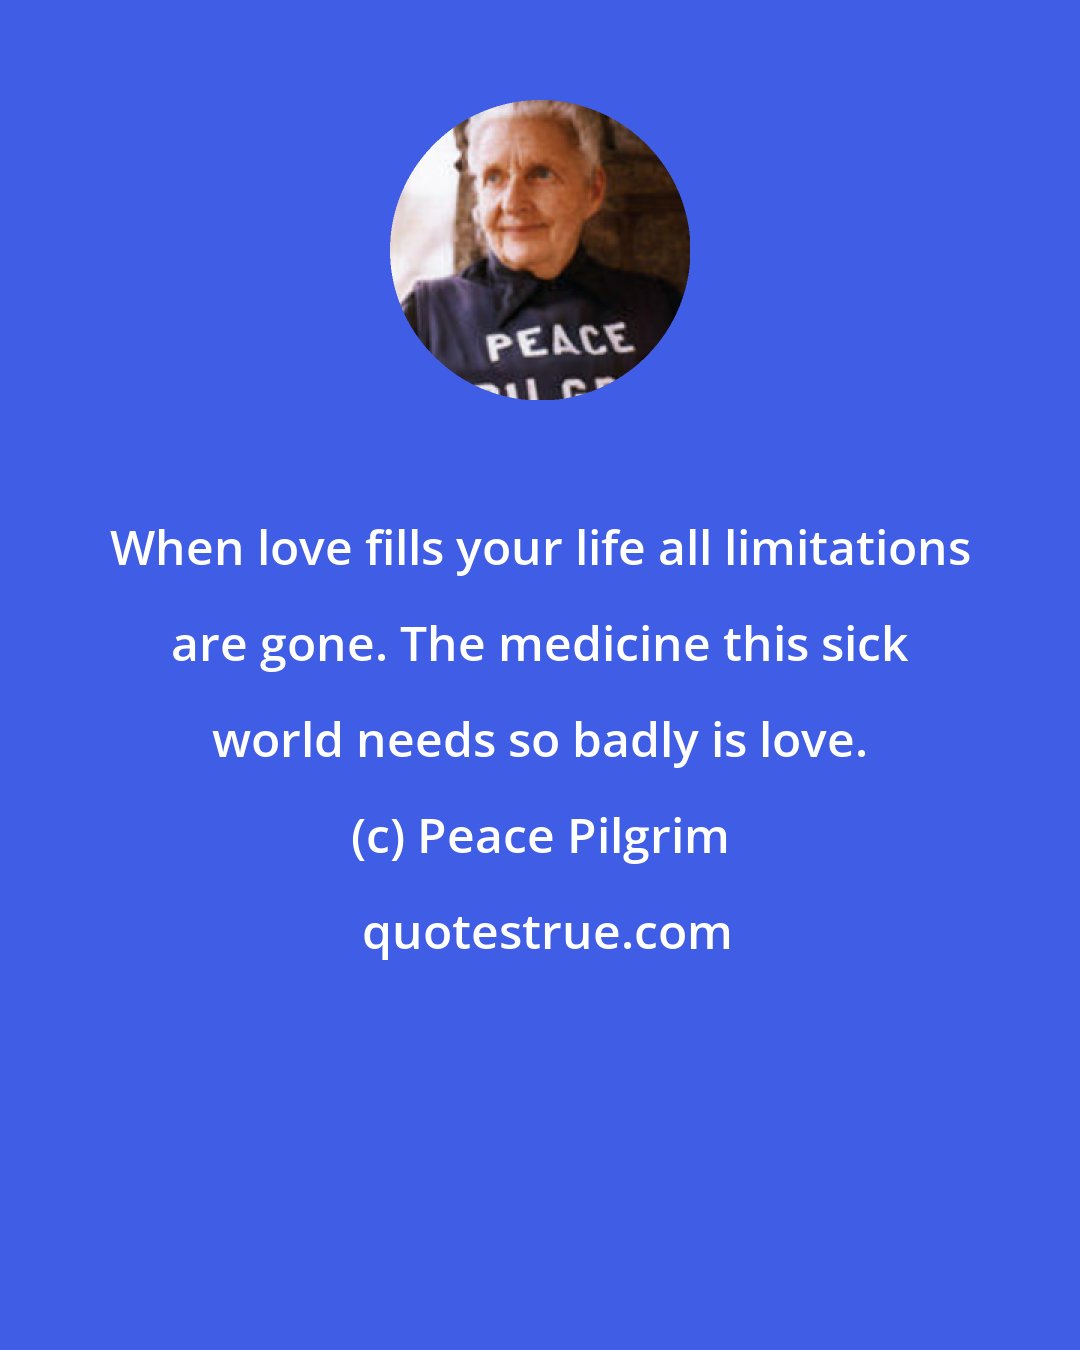 Peace Pilgrim: When love fills your life all limitations are gone. The medicine this sick world needs so badly is love.